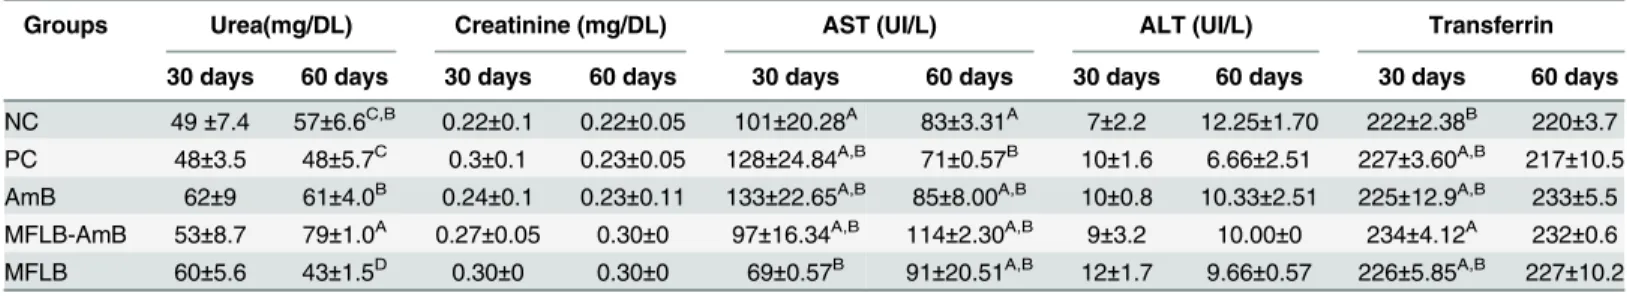 Table 3. Biochemical and enzymatic analysis of blood from female BALB/c mice after treatment with AmB, MFLB-AmB, and MFLB for 30 or 60 days.